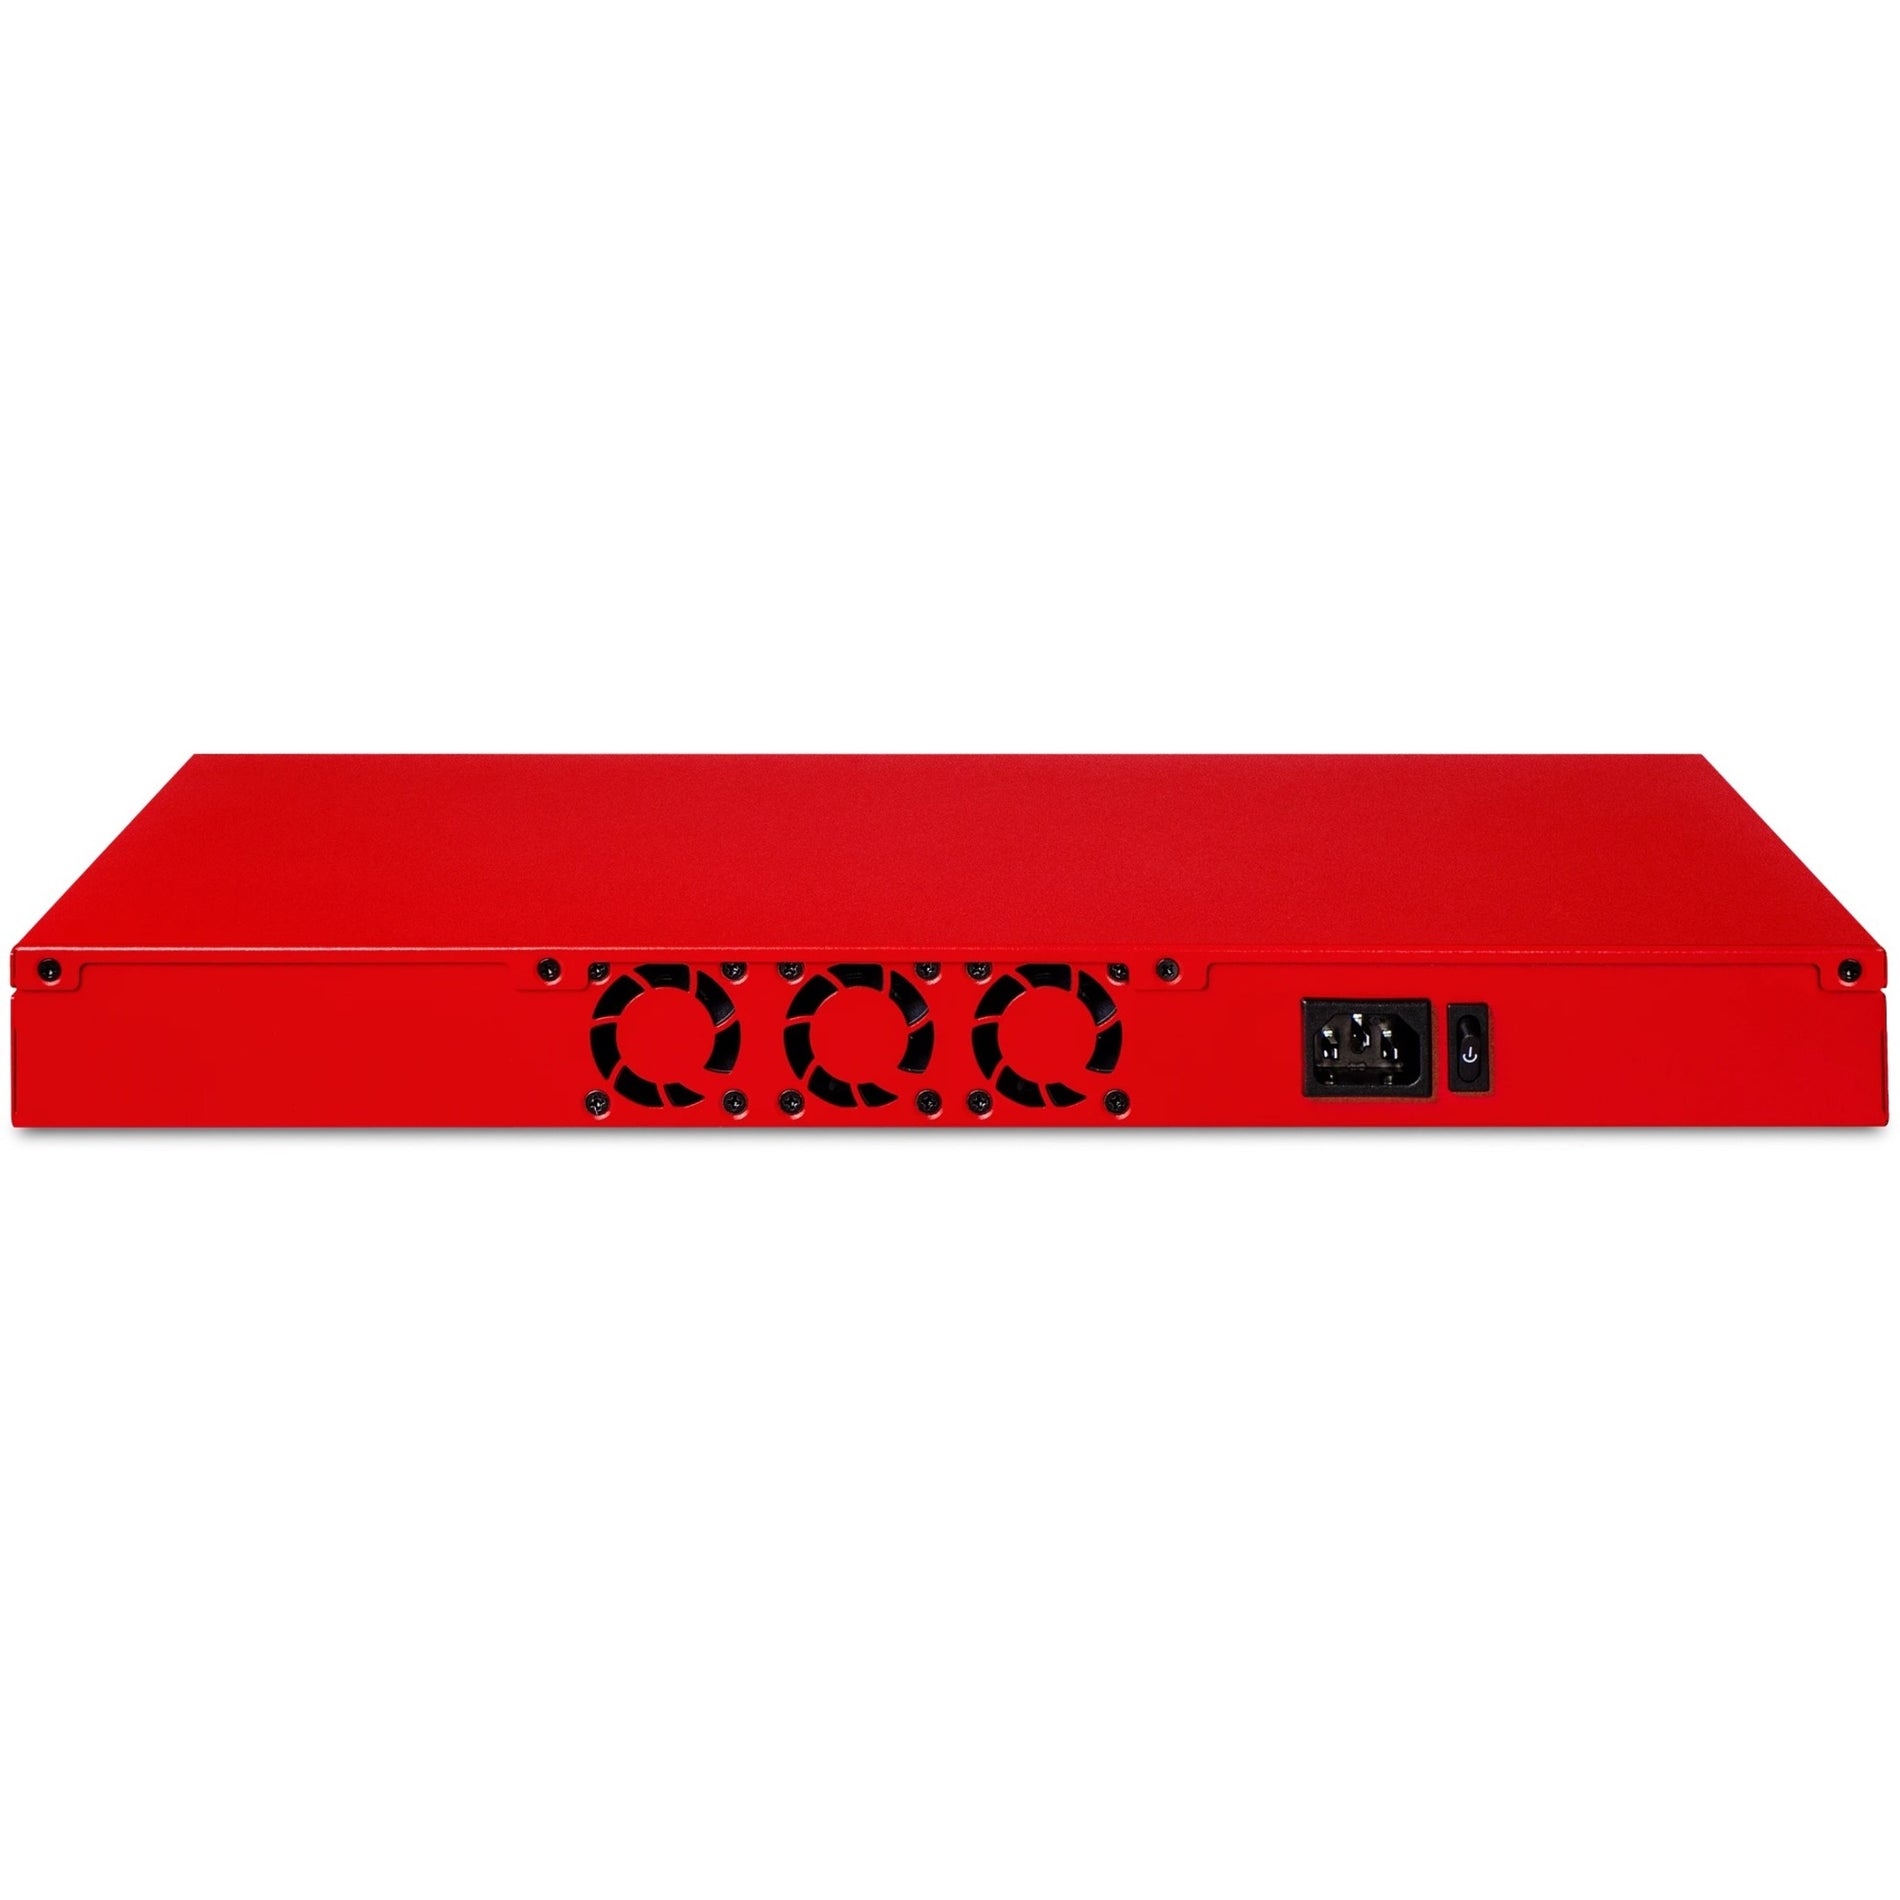 WatchGuard WGM39002003 Firebox M390 Network Security/Firewall Appliance, 8 Ports, 3-Year Basic Security Suite